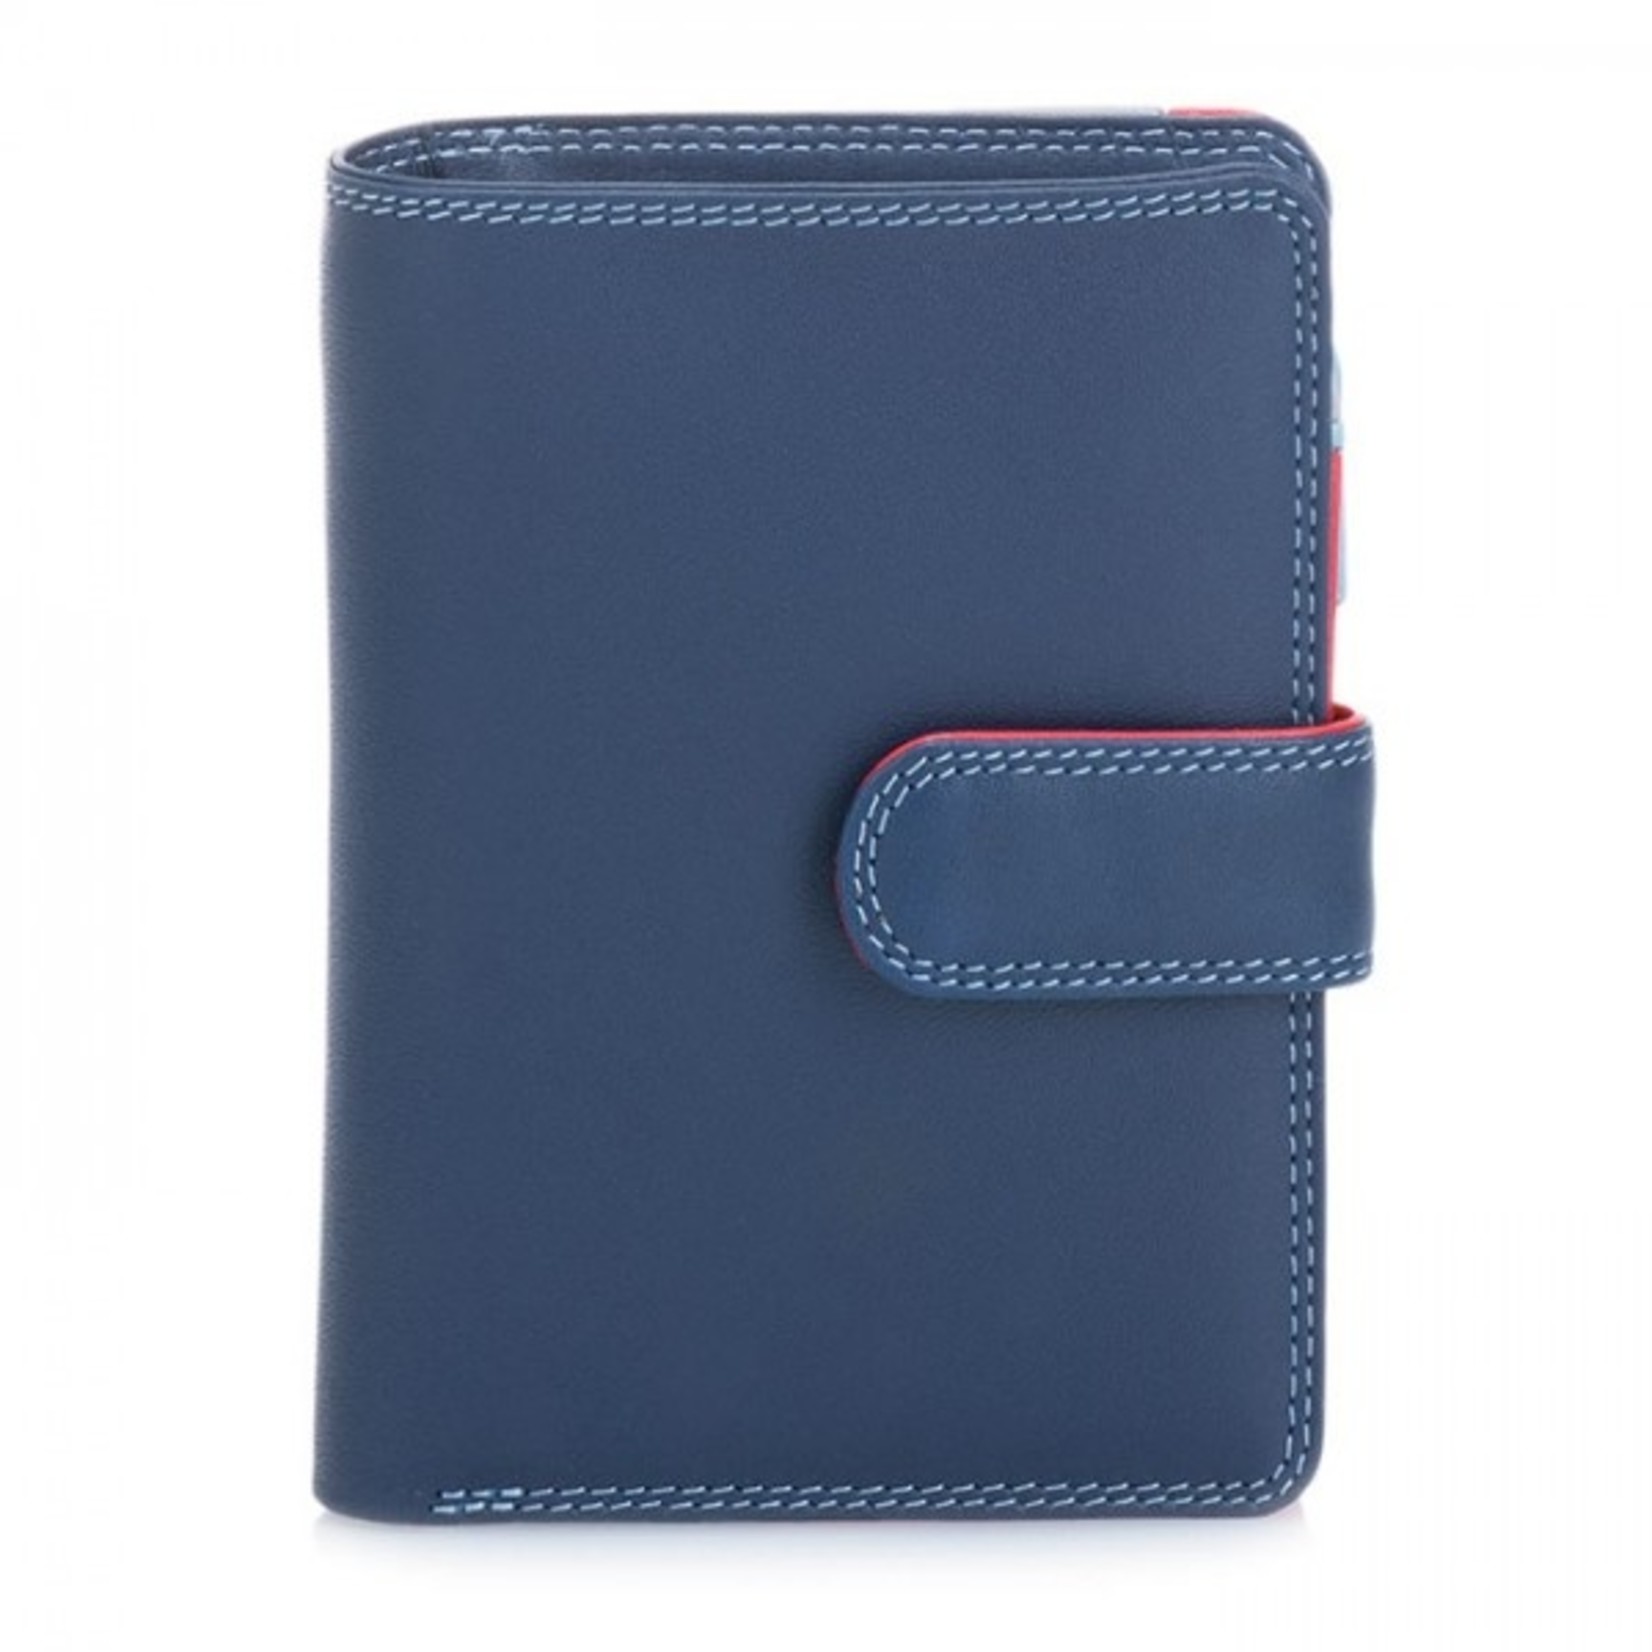 Mywalit Mywalit Large Snap Wallet